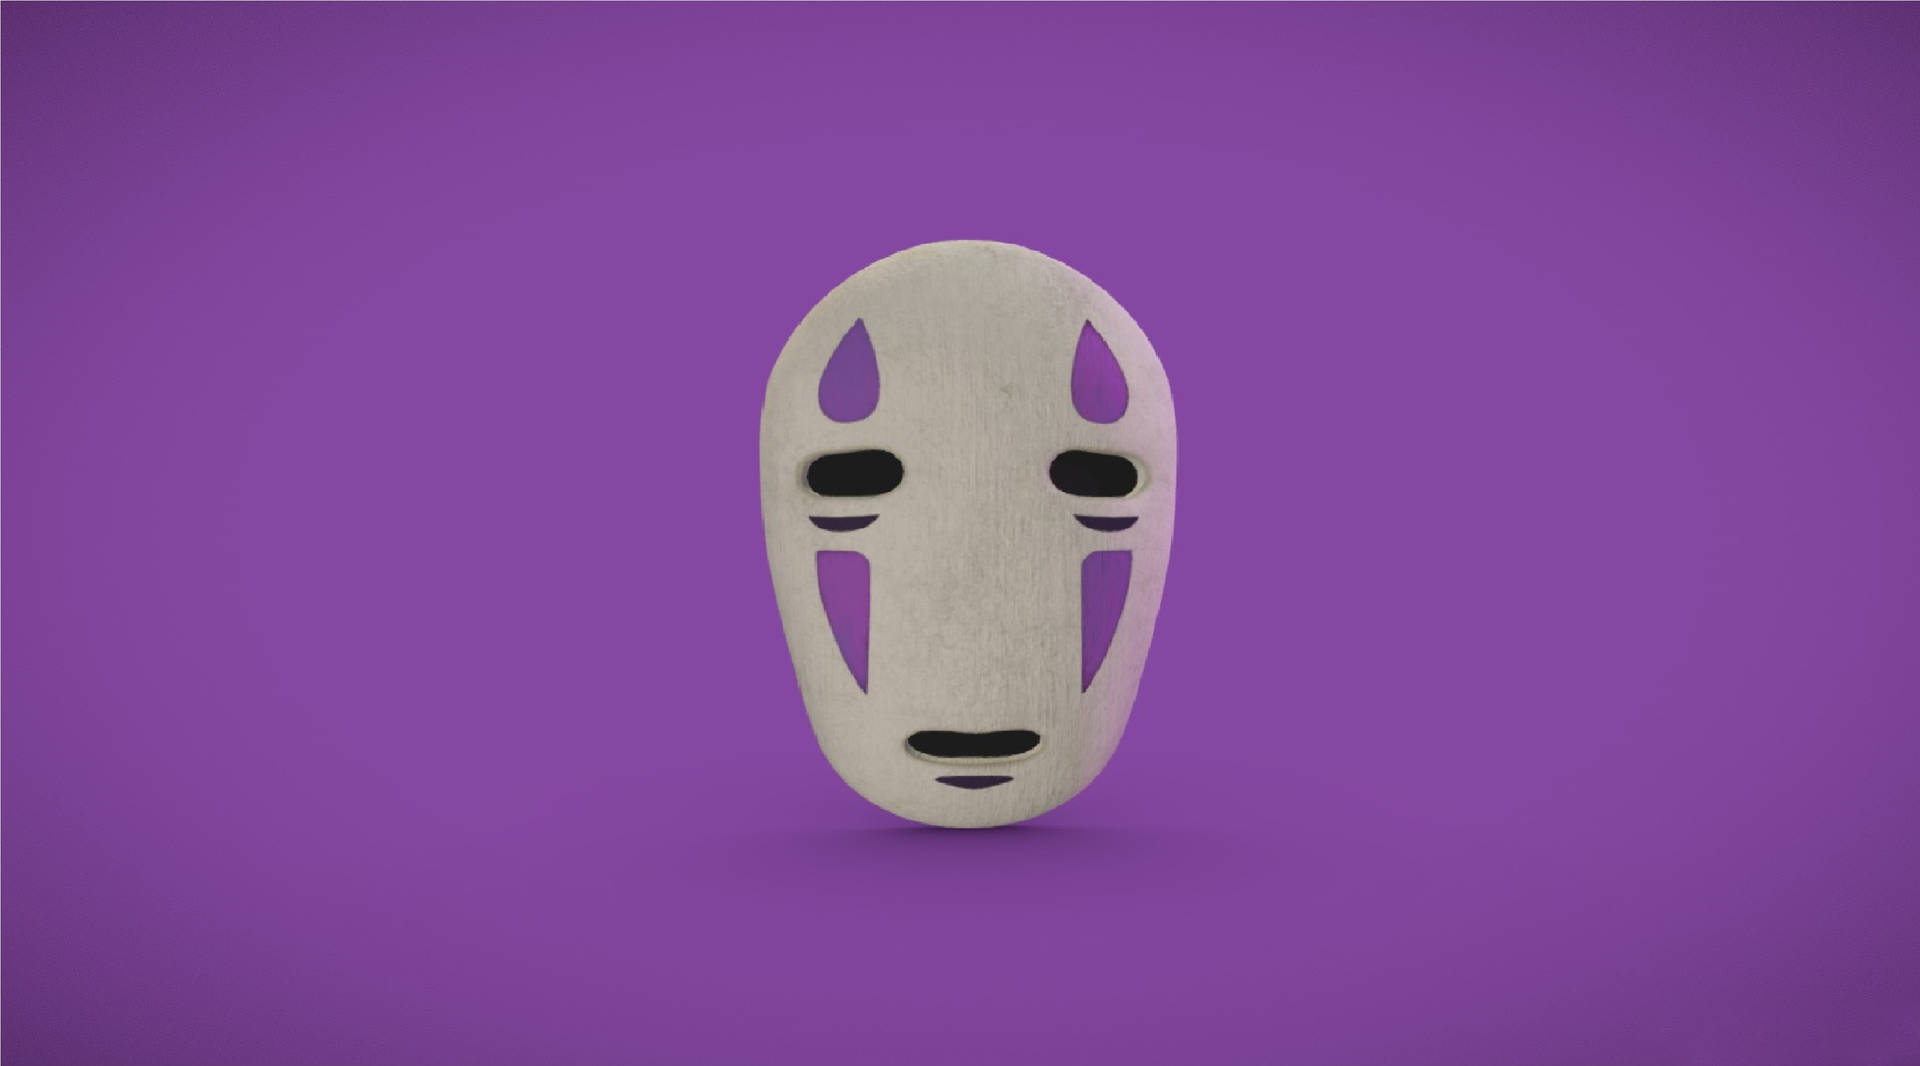 Enigmatic No Face On A Violet Background